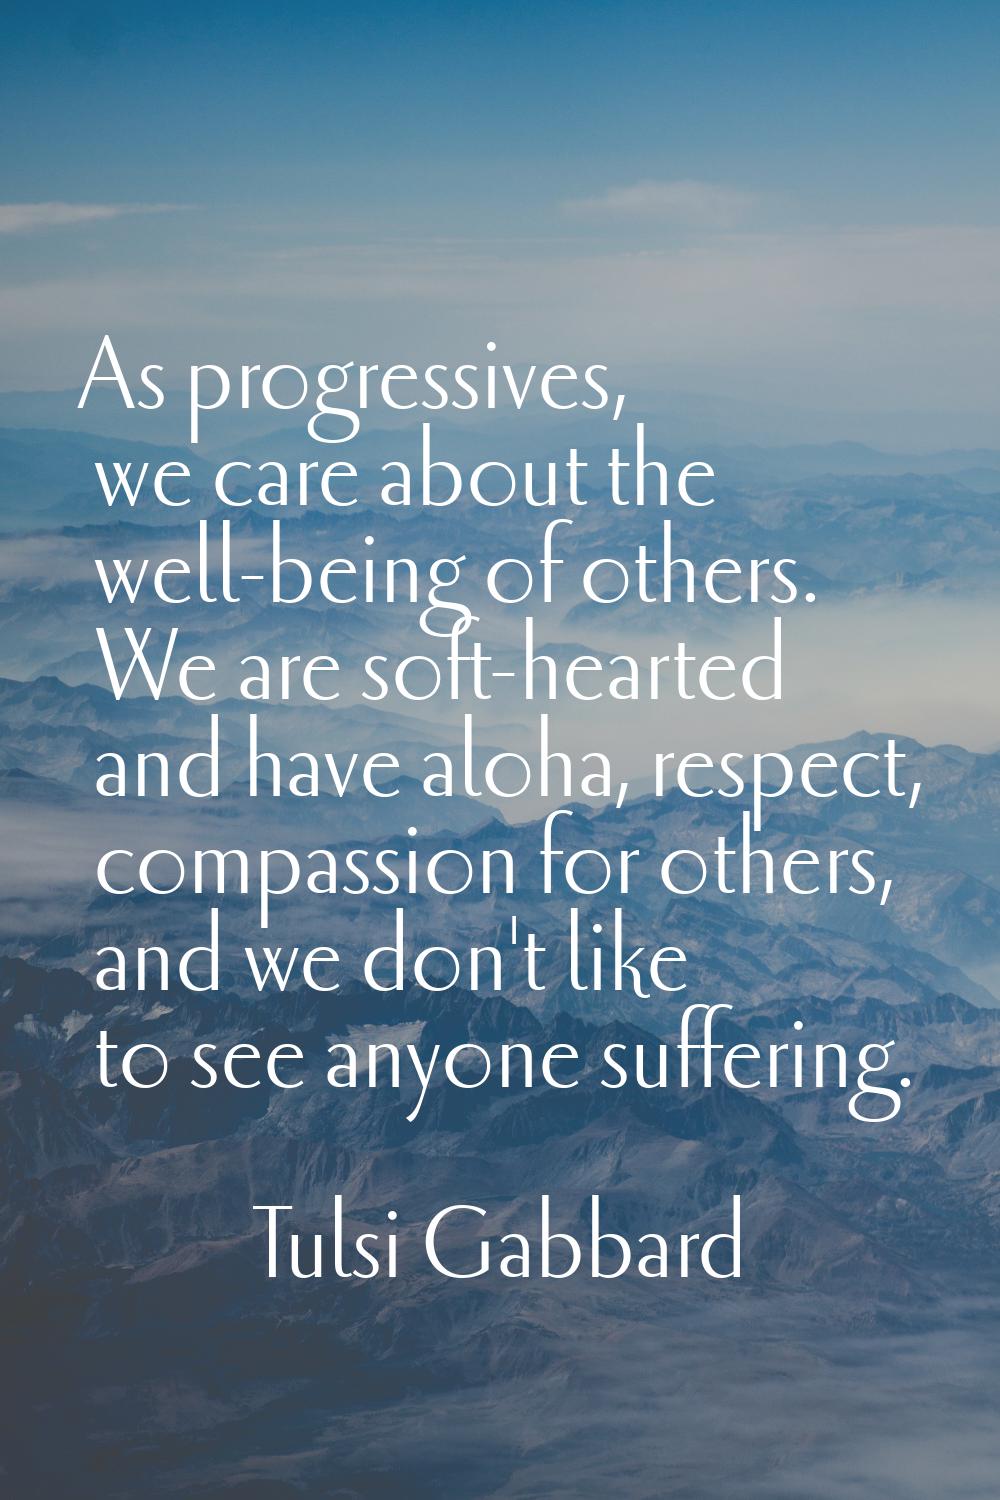 As progressives, we care about the well-being of others. We are soft-hearted and have aloha, respec